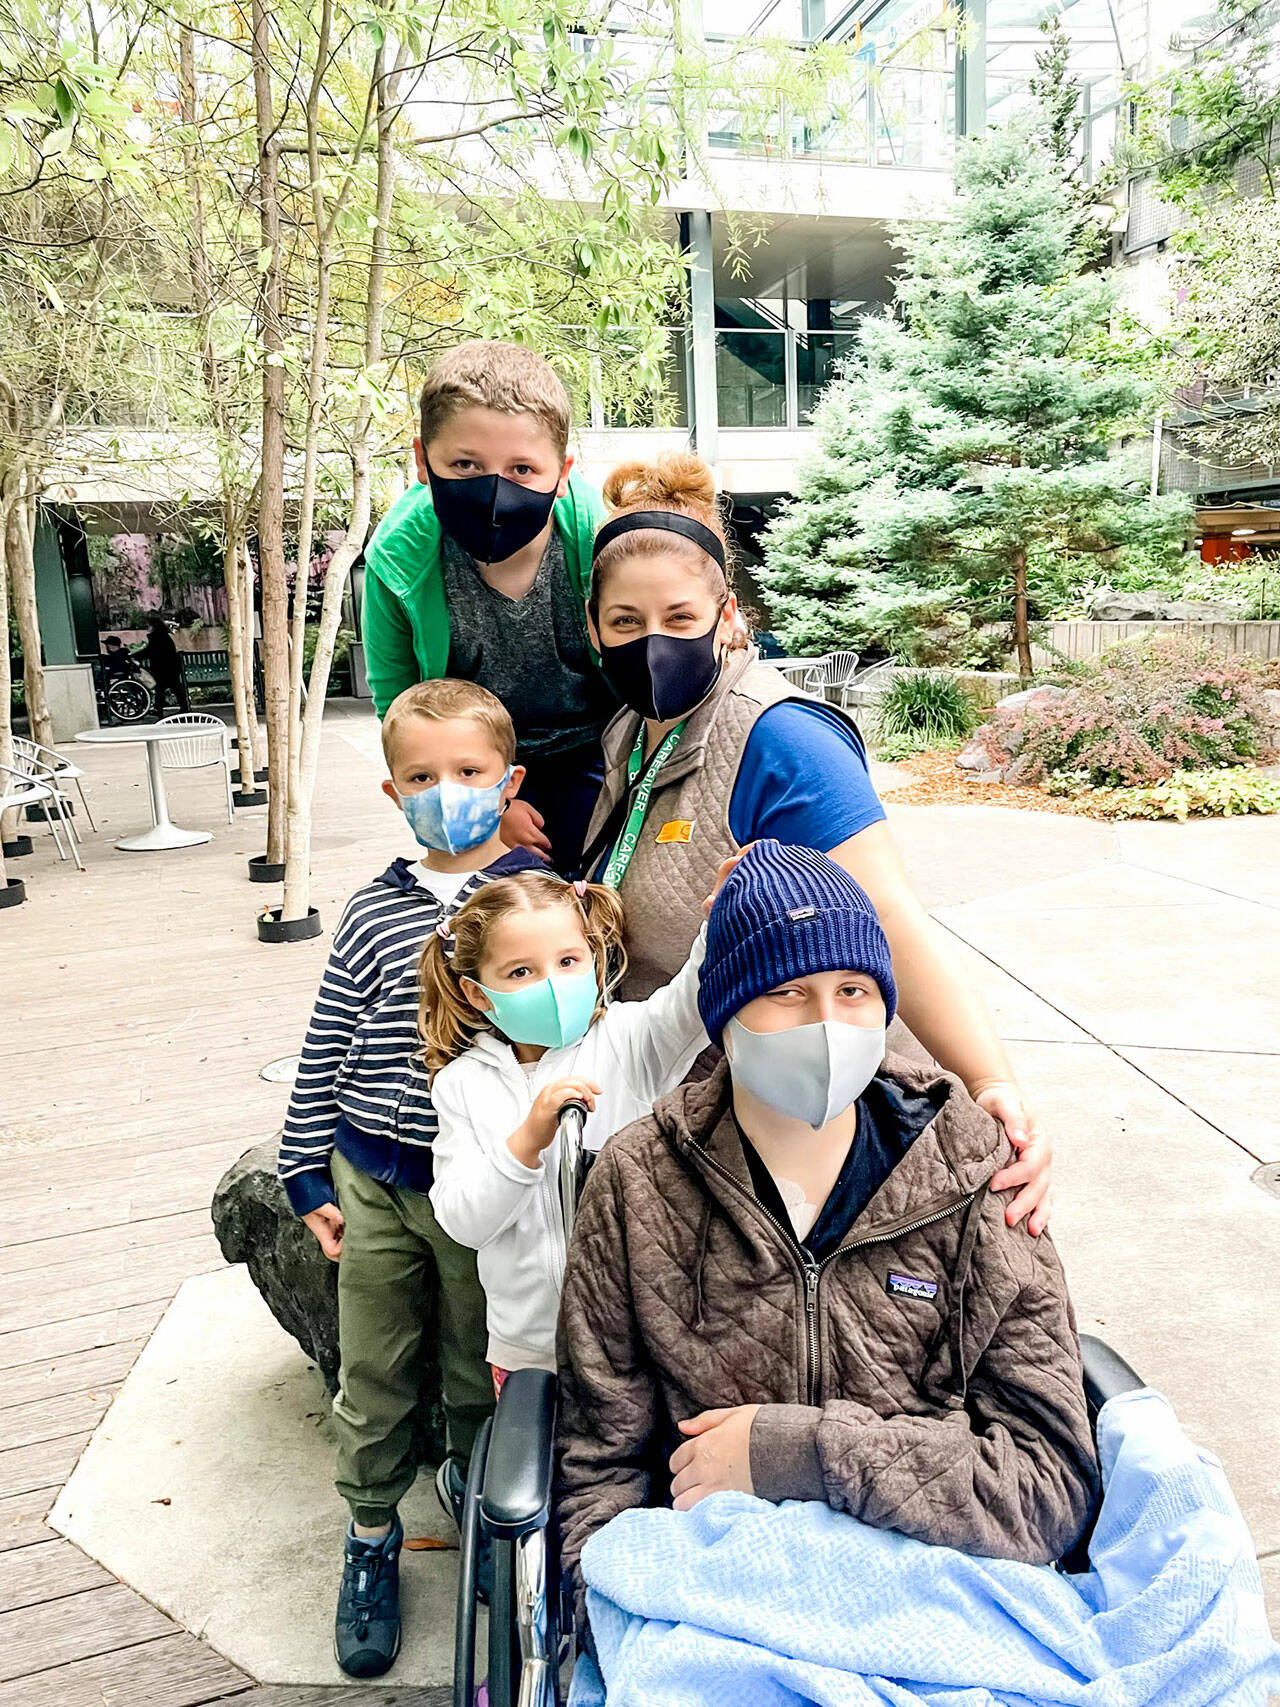 Five of the six-member Ake family pose outside the Seattle Children’s hospital. Emerson Ake, front, is battling leukemia with quiet courage and good humor, and his family has temporarily moved from Sequim to stay together. (Ake family)